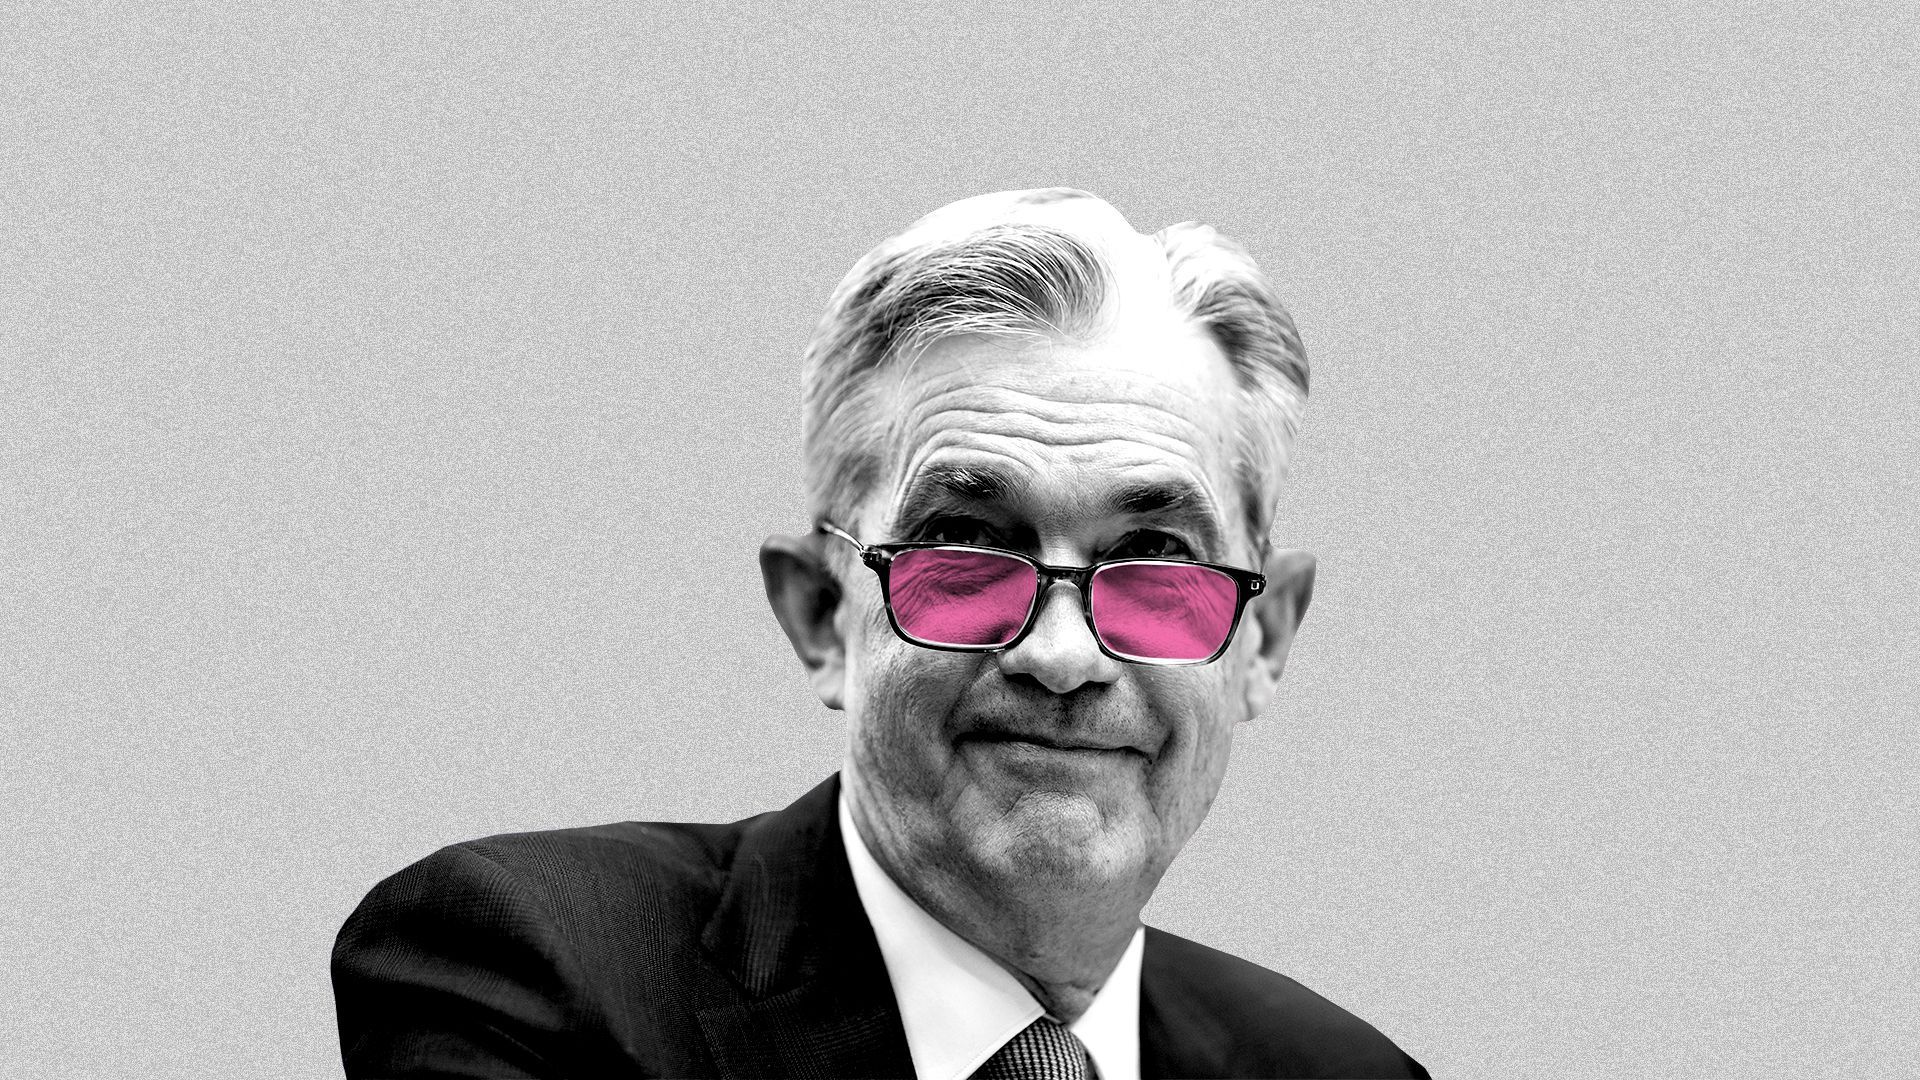 Fed chairman Jerome Powell wearing rose-colored glasses.